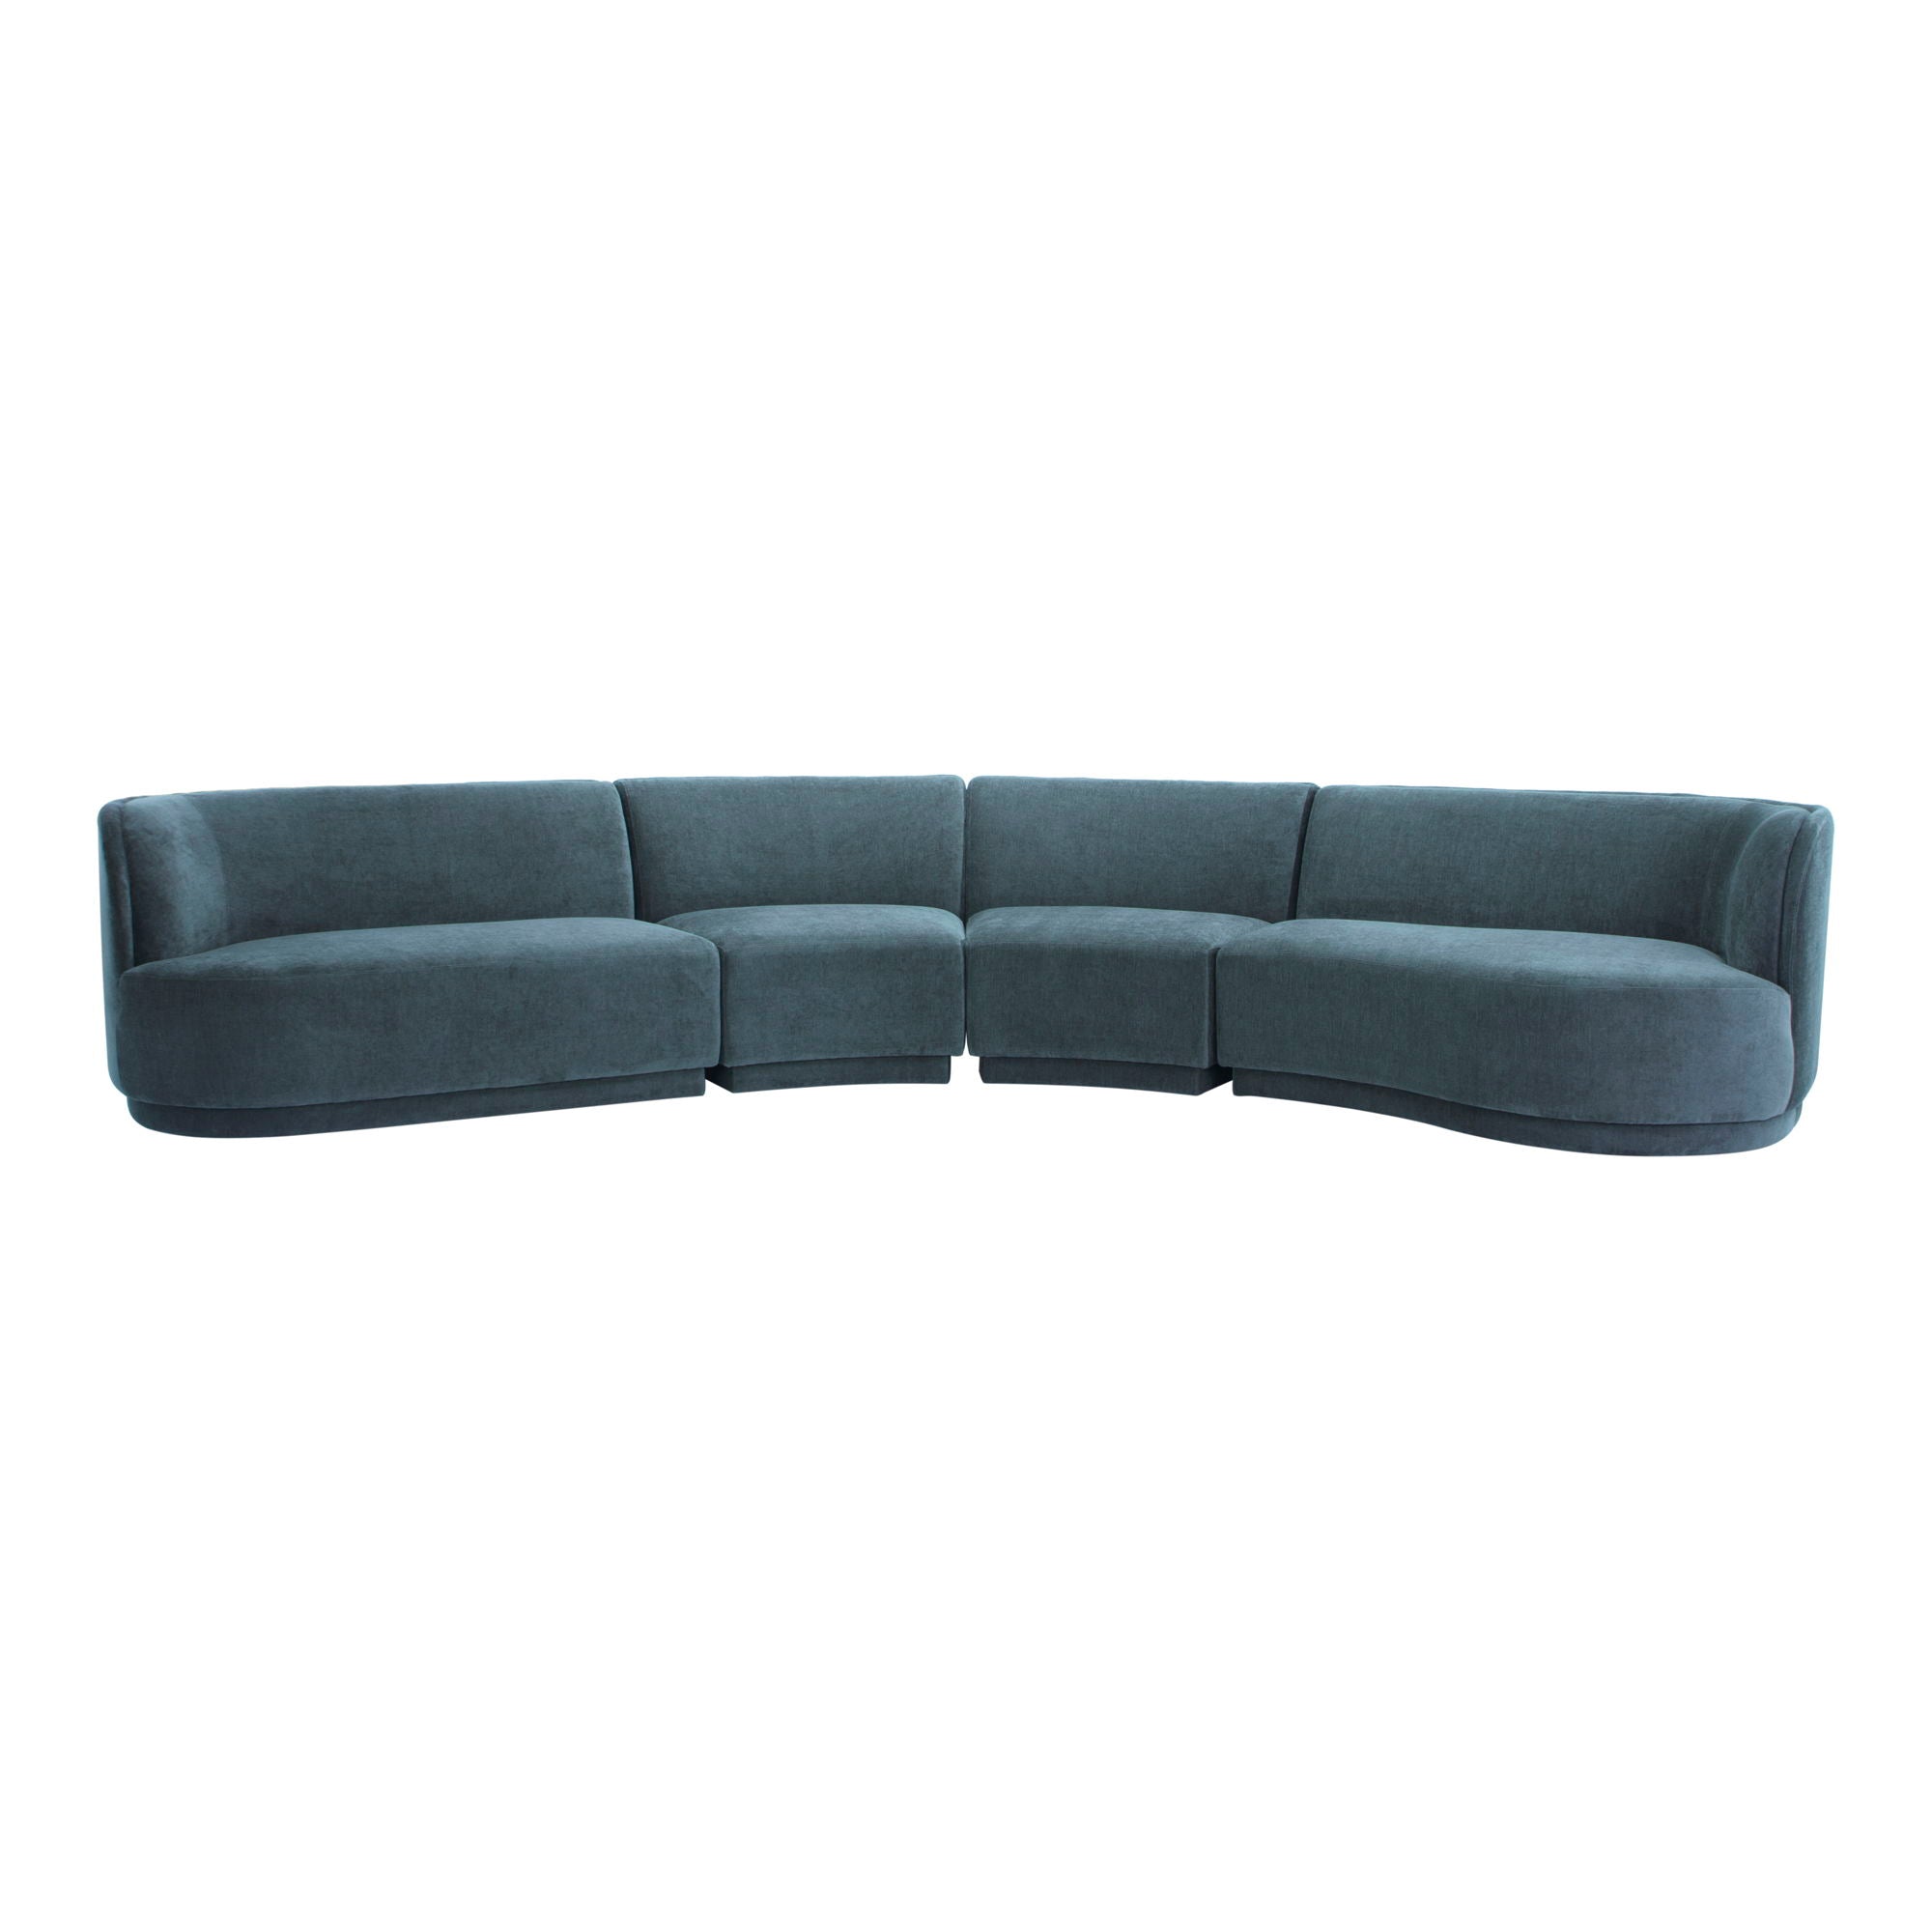 Yoon - Eclipse Modular Sectional Right-Facing Chaise - Blue-Stationary Sectionals-American Furniture Outlet